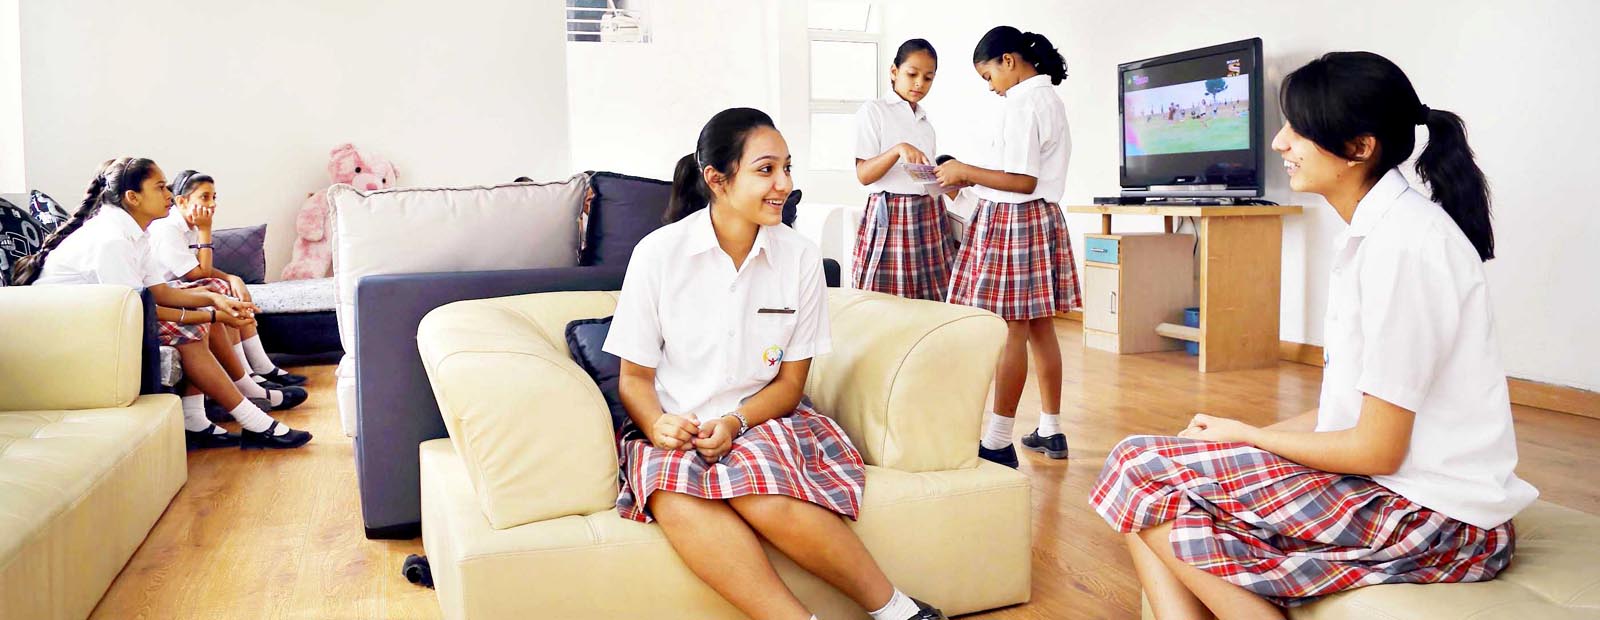 The Significance of Boarding School Experience